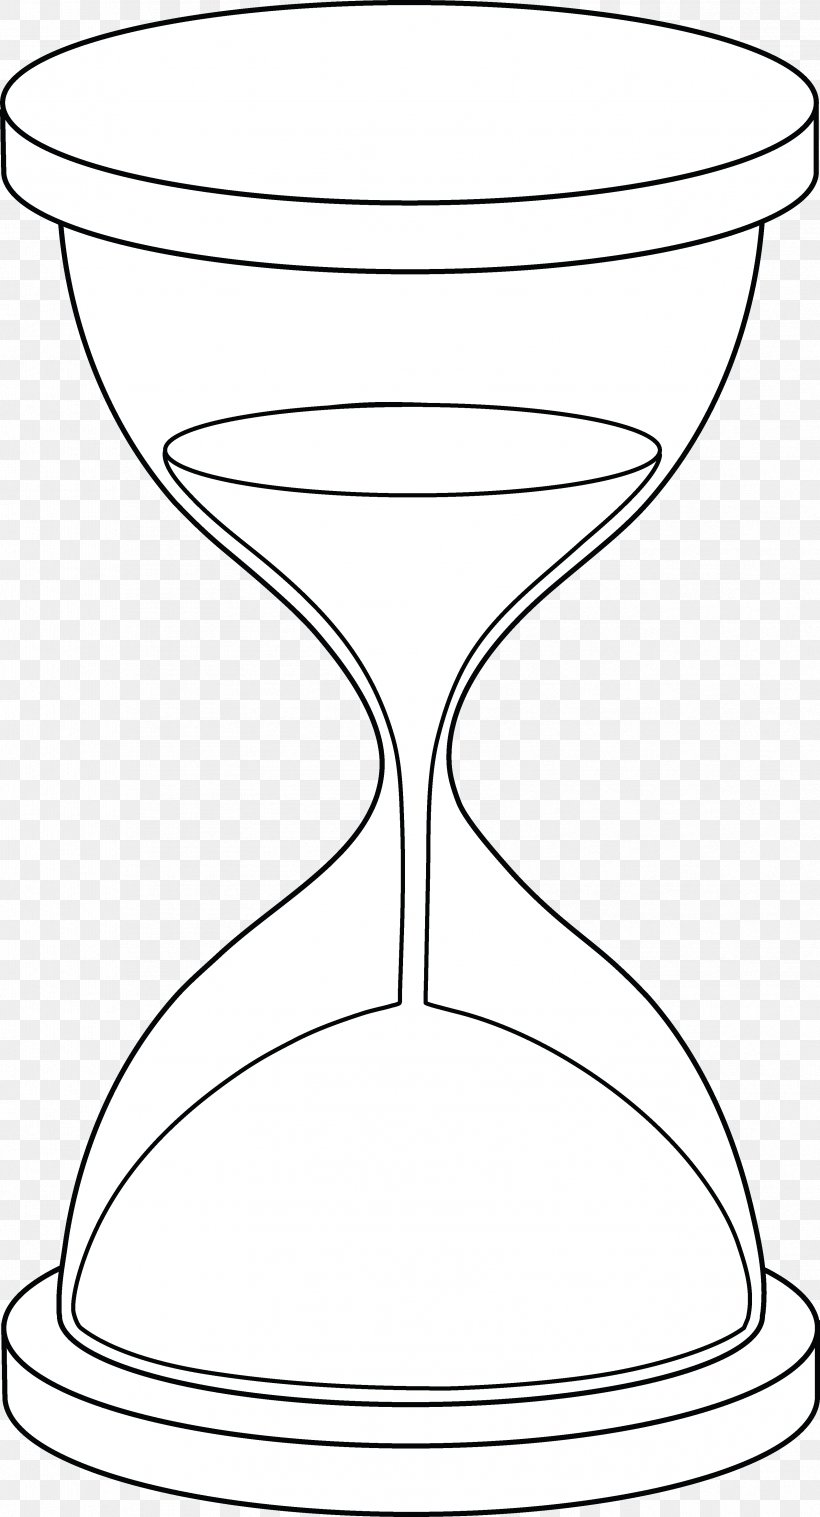 Hourglass Coloring Book Drawing Clip Art, PNG, 3353x6204px, Hourglass